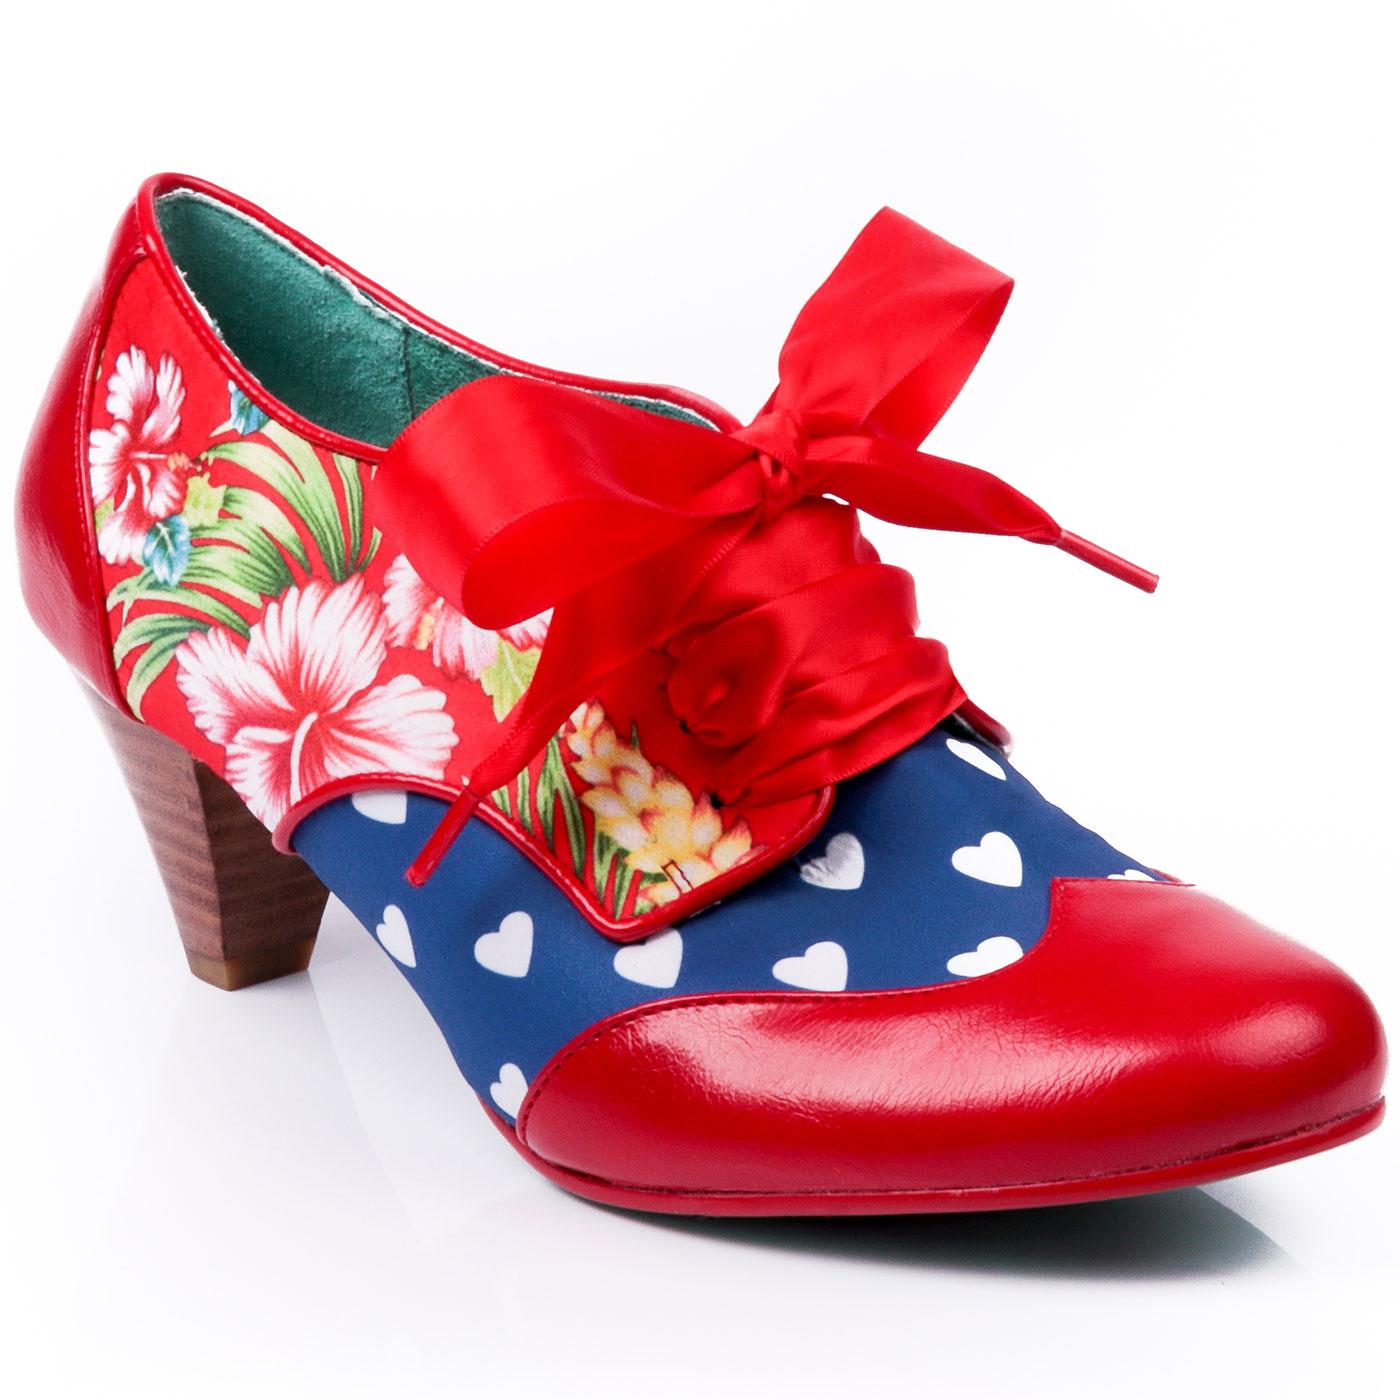 End Of Story POETIC LICENCE Vintage Floral Shoes R